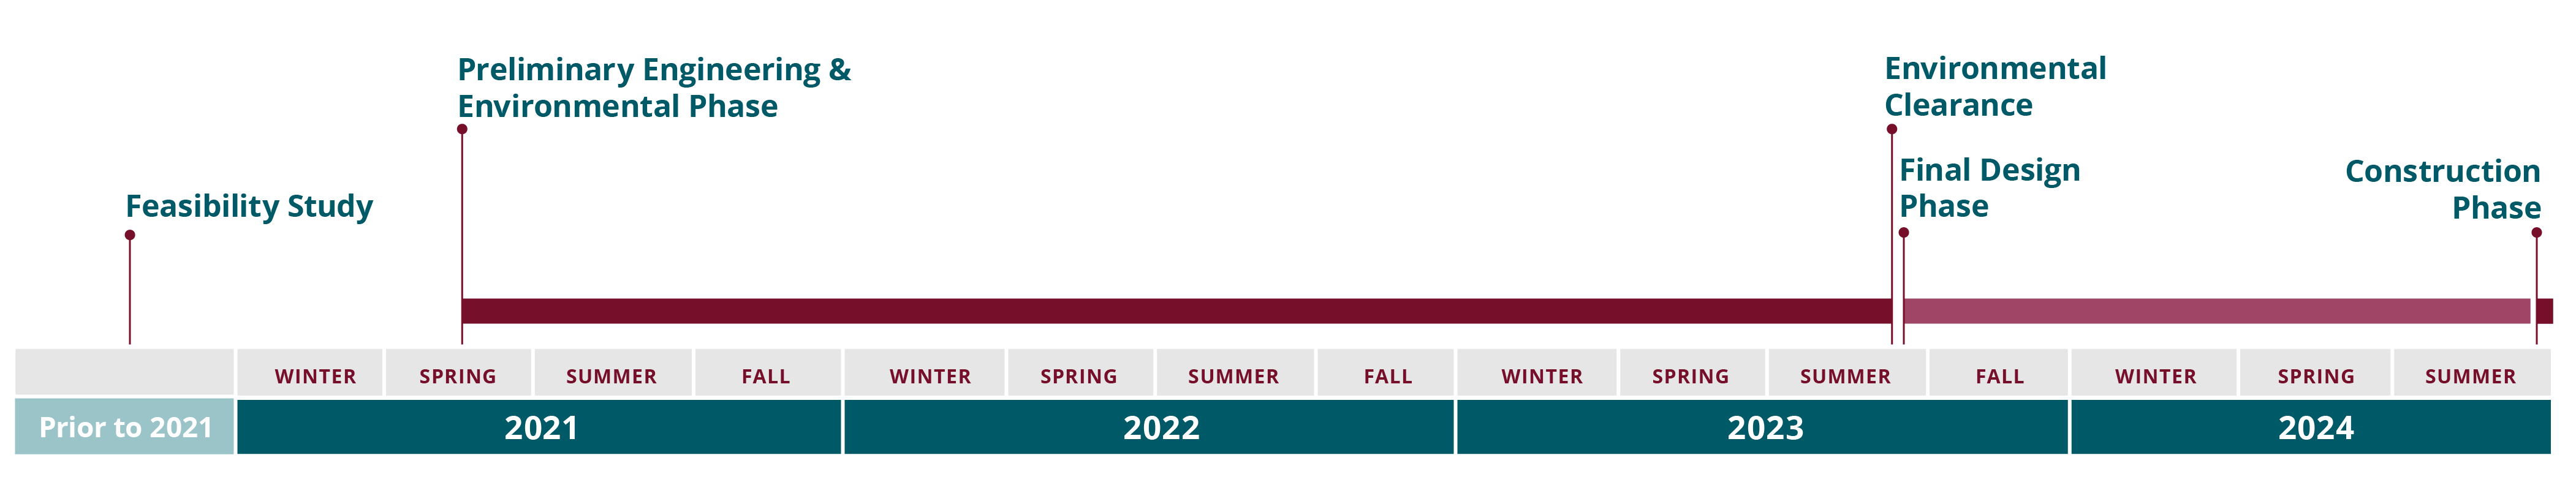 Prior to 2021 was feasibility study, Spring 2021 preliminary environmental review and engineering phase begins and continues to end of Summer 2023. Environmental Clearance in Summer 2023 and Final Design Phase in Summer 2023-2024. Construction Phase to begin Summer 2024.